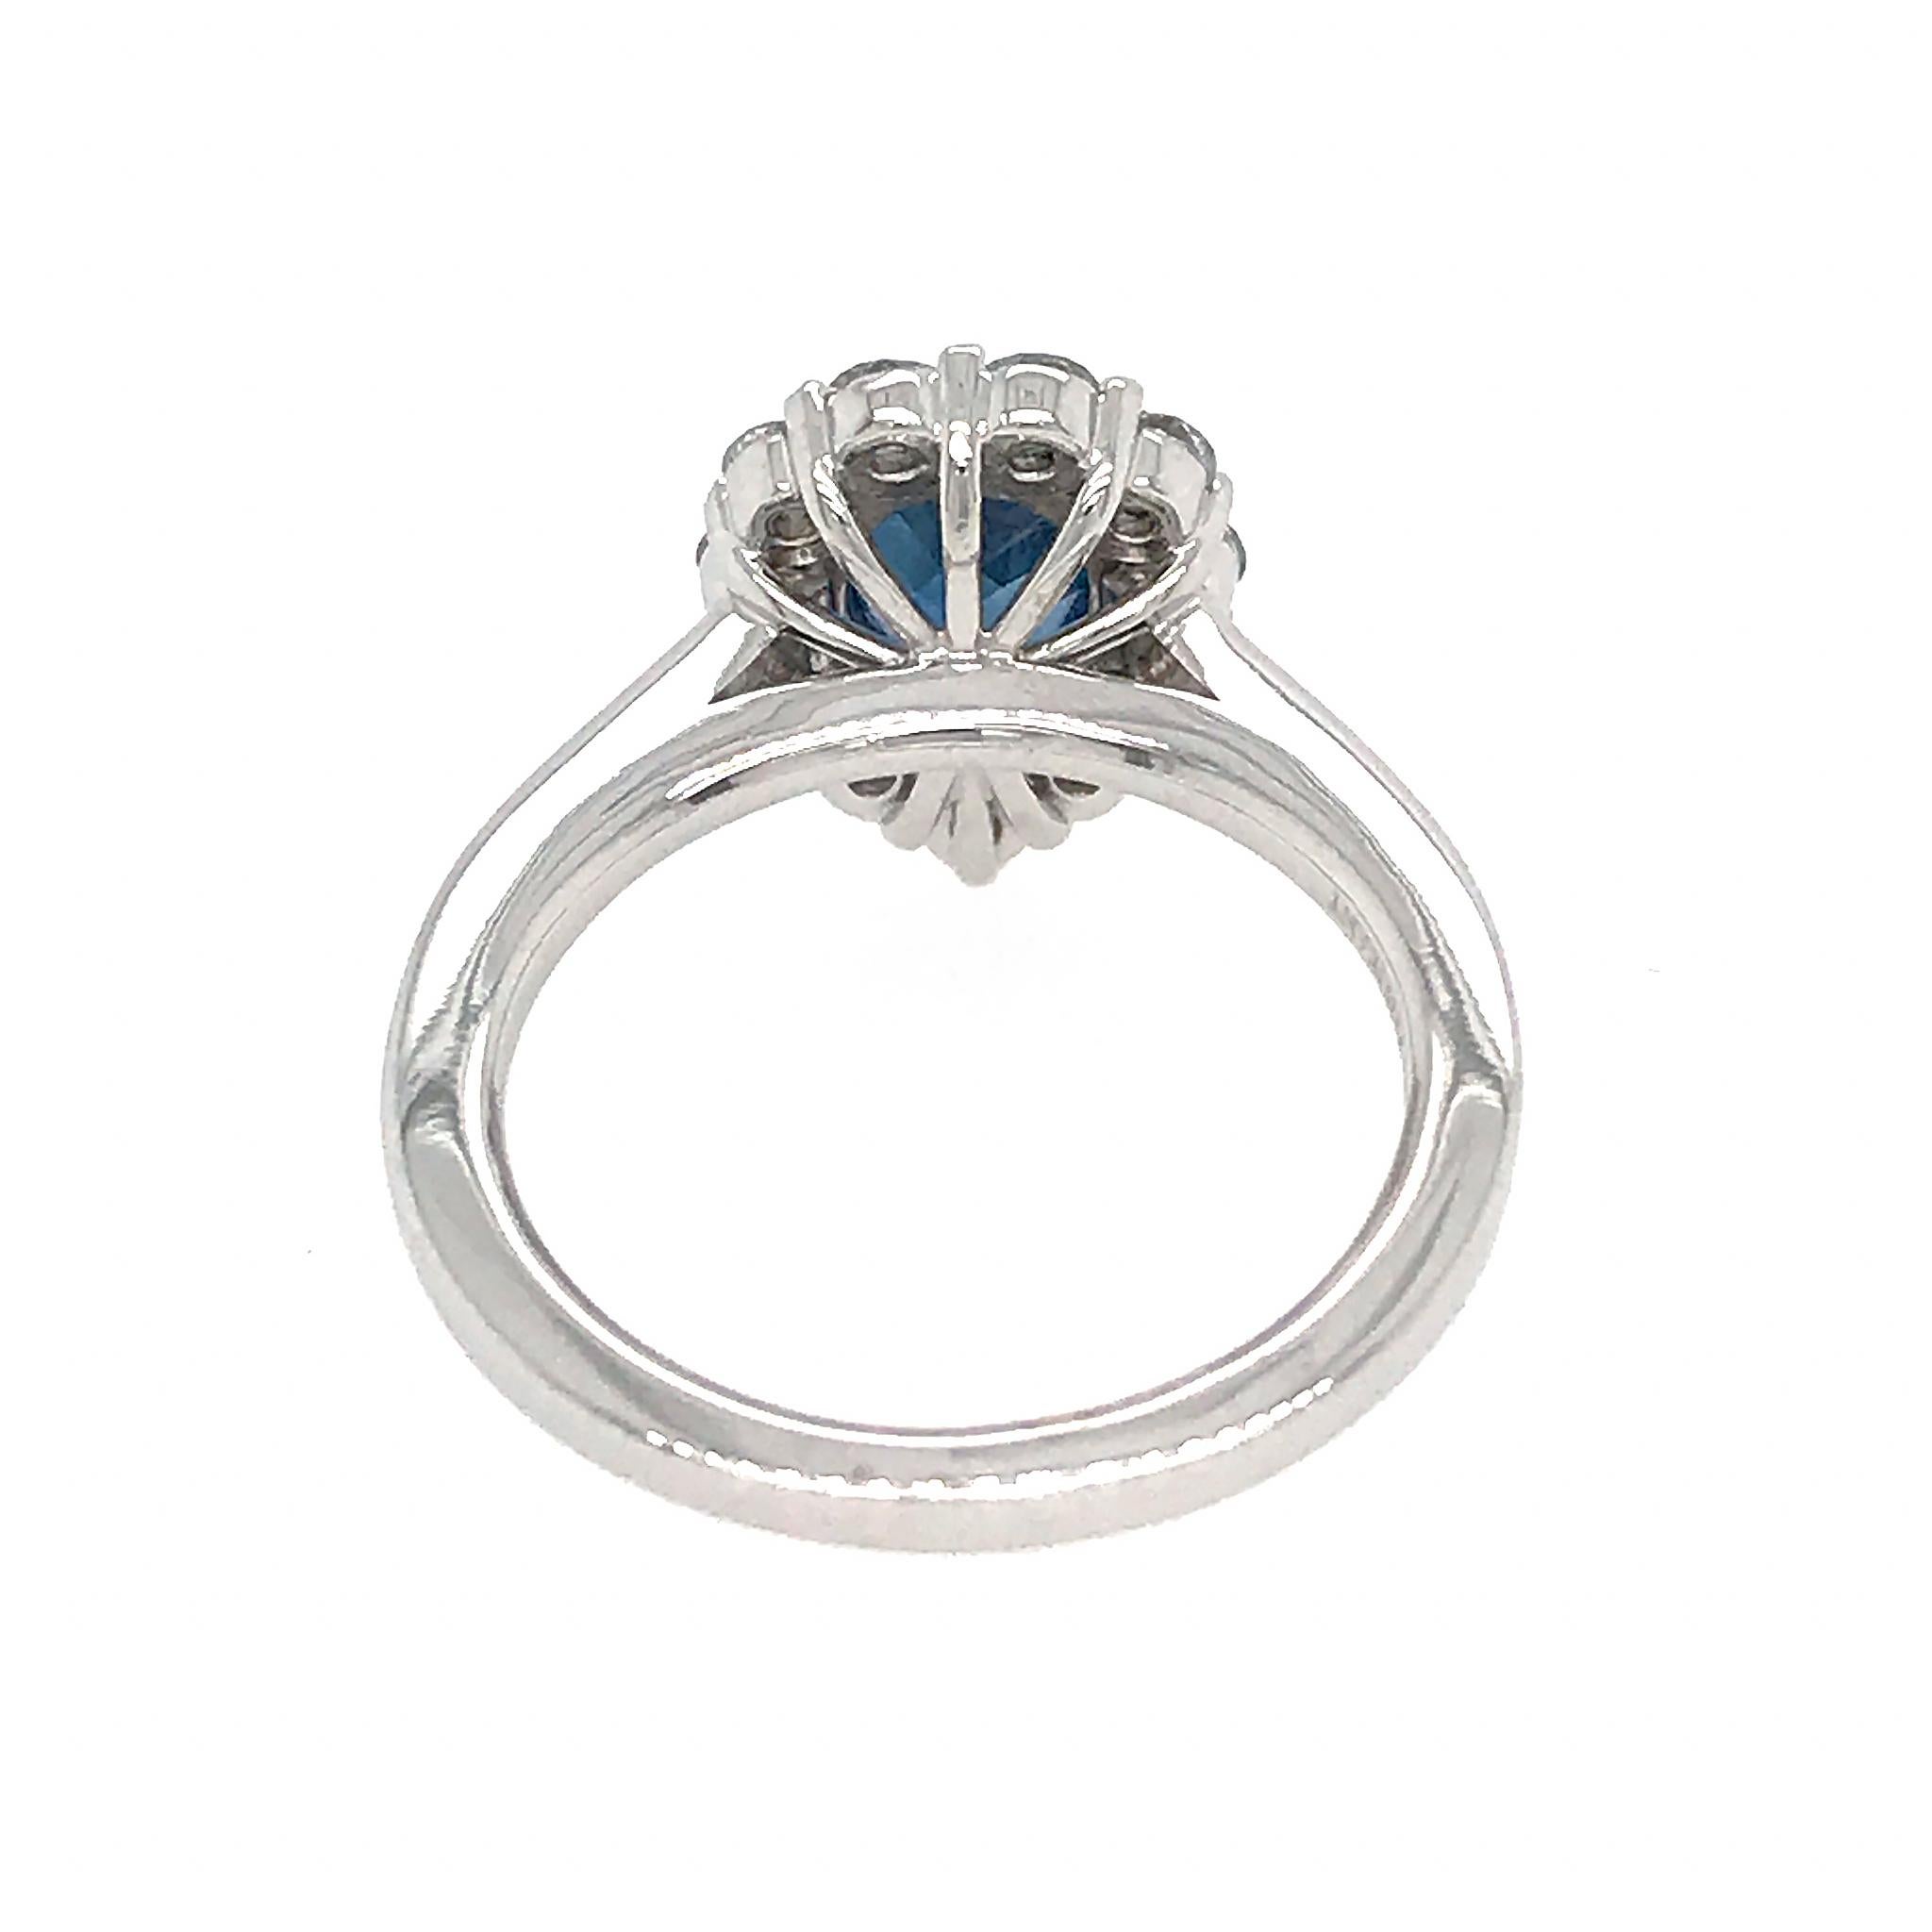 A great alternative to a Diamond Engagement Ring. Very High-fashion. Impressive, cost-effective alternative for a young couple.
METAL TYPE: 14K White Gold
STONE WEIGHT: Sapphire = 1.11 ct twd 
                             Diamond = 0.73 ct twd 
RING